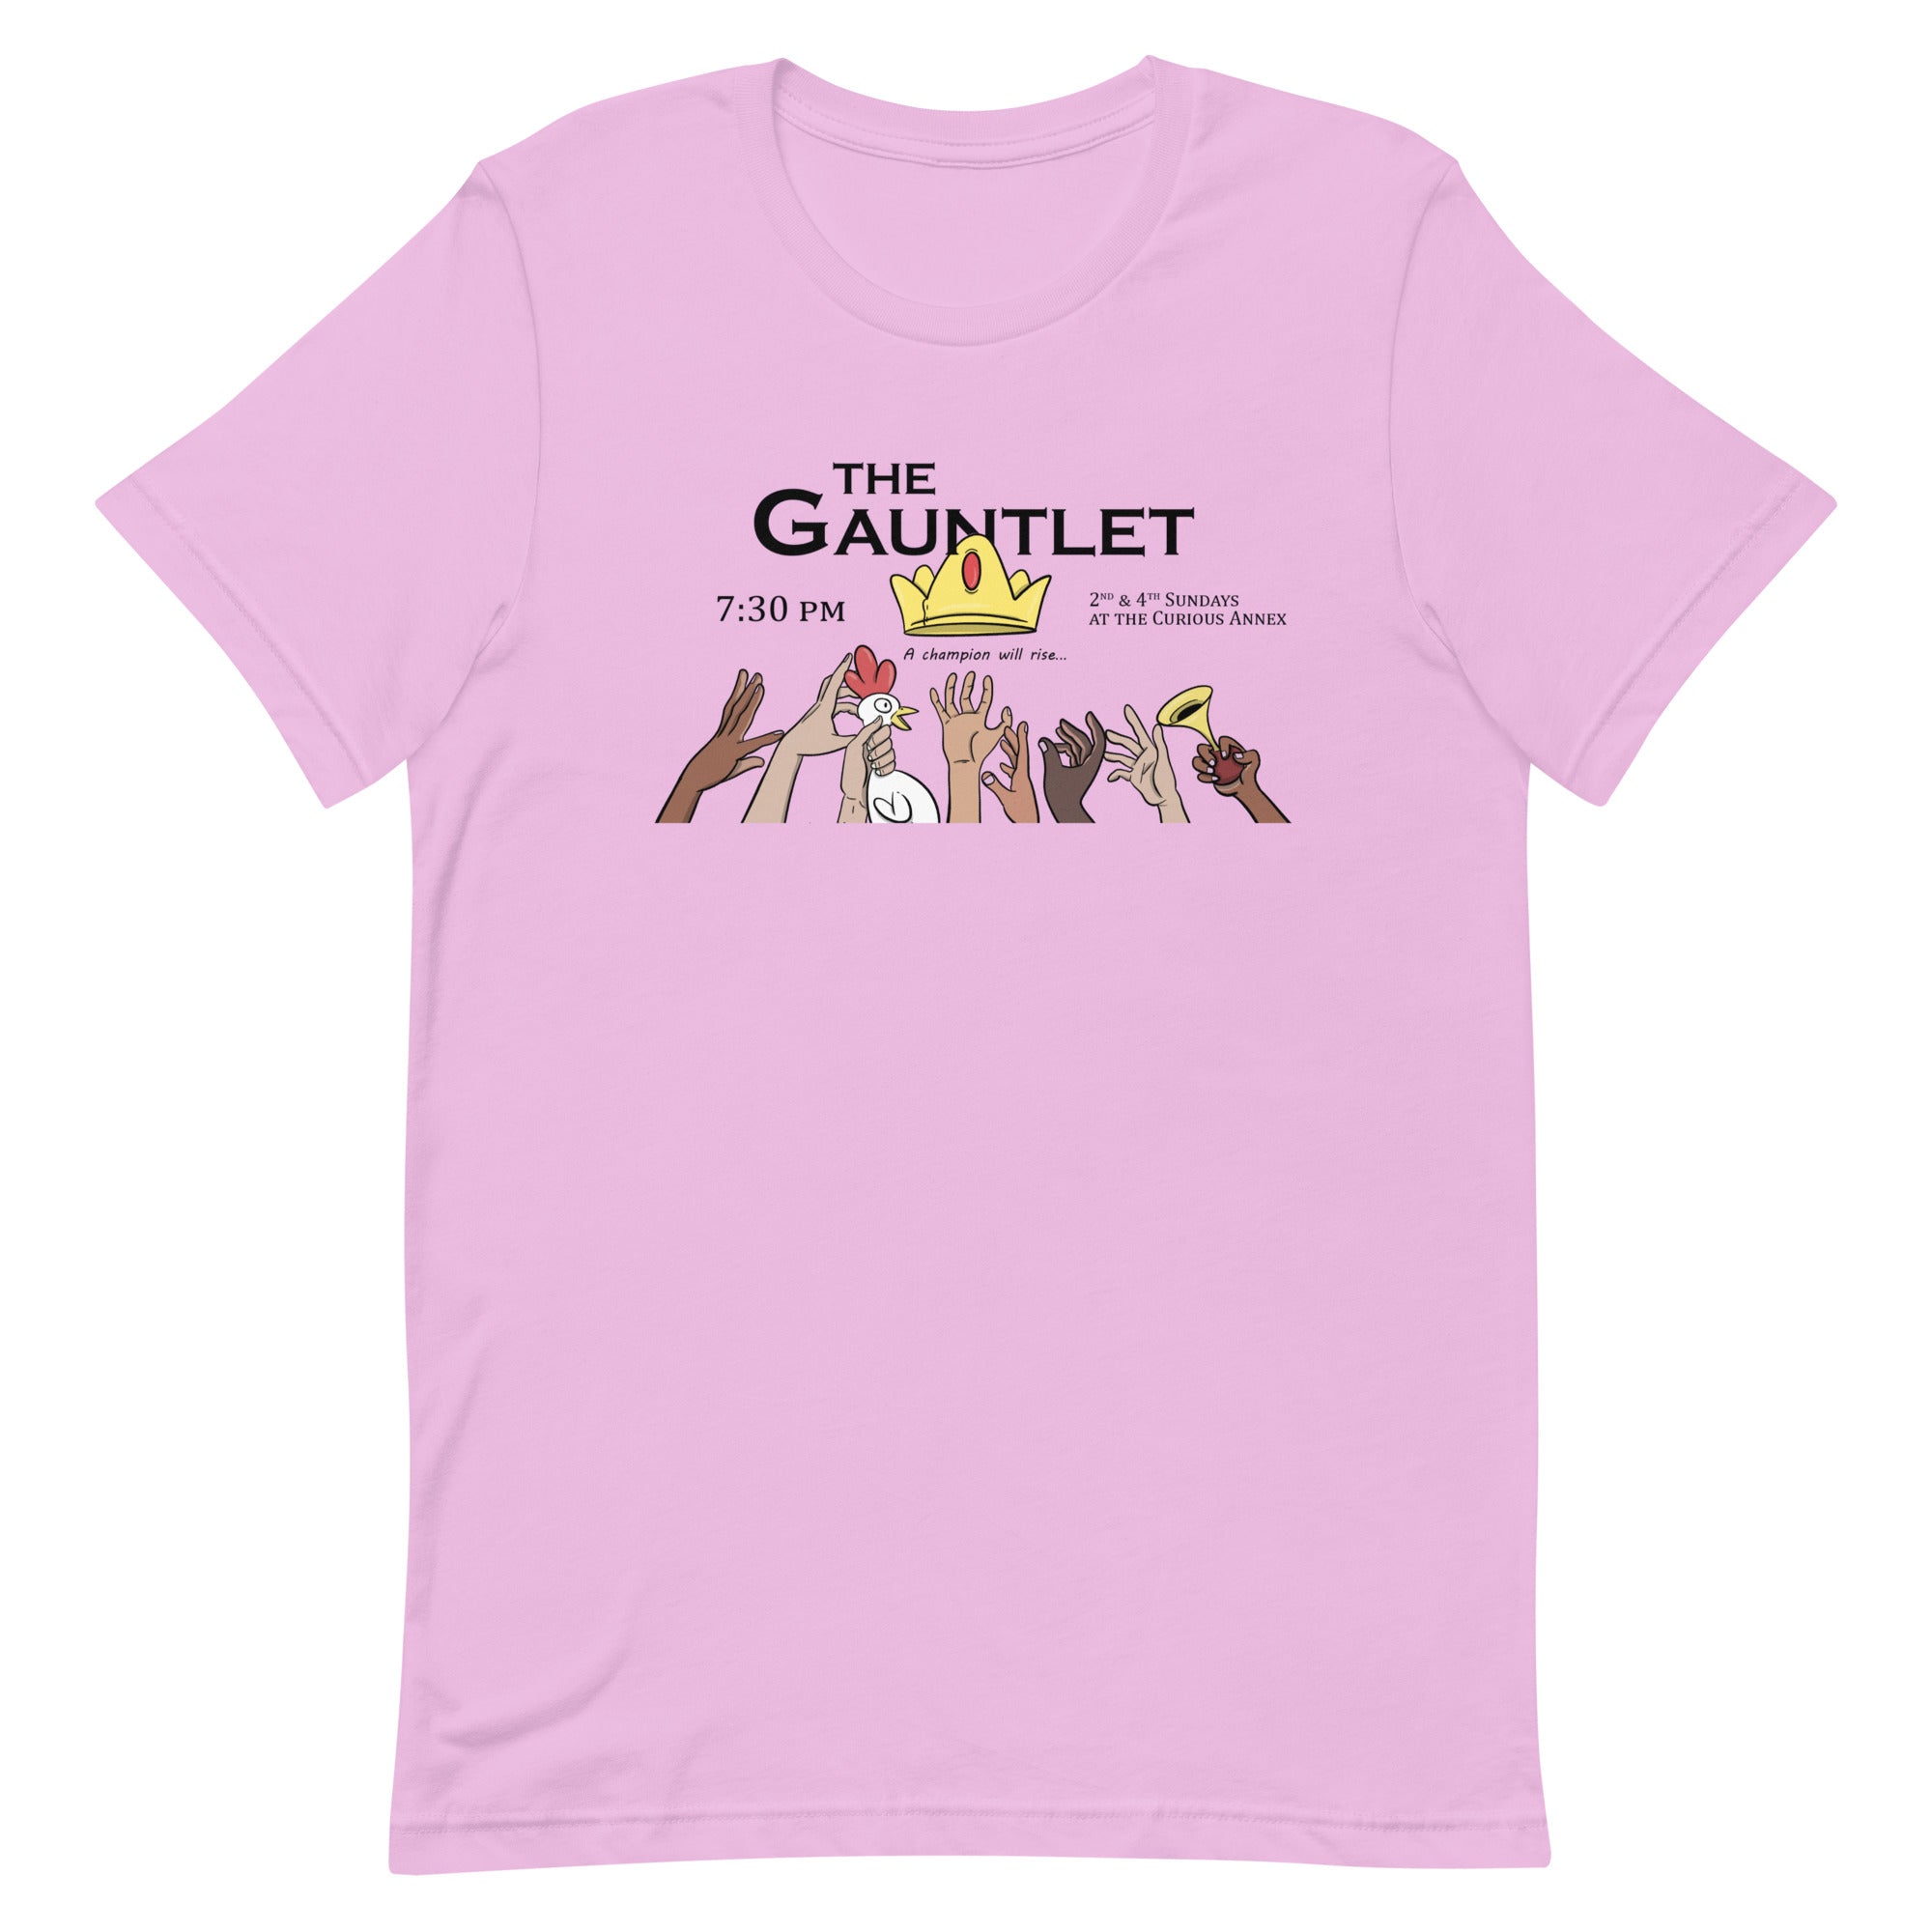 The Gauntlet - At-Cost T-shirt